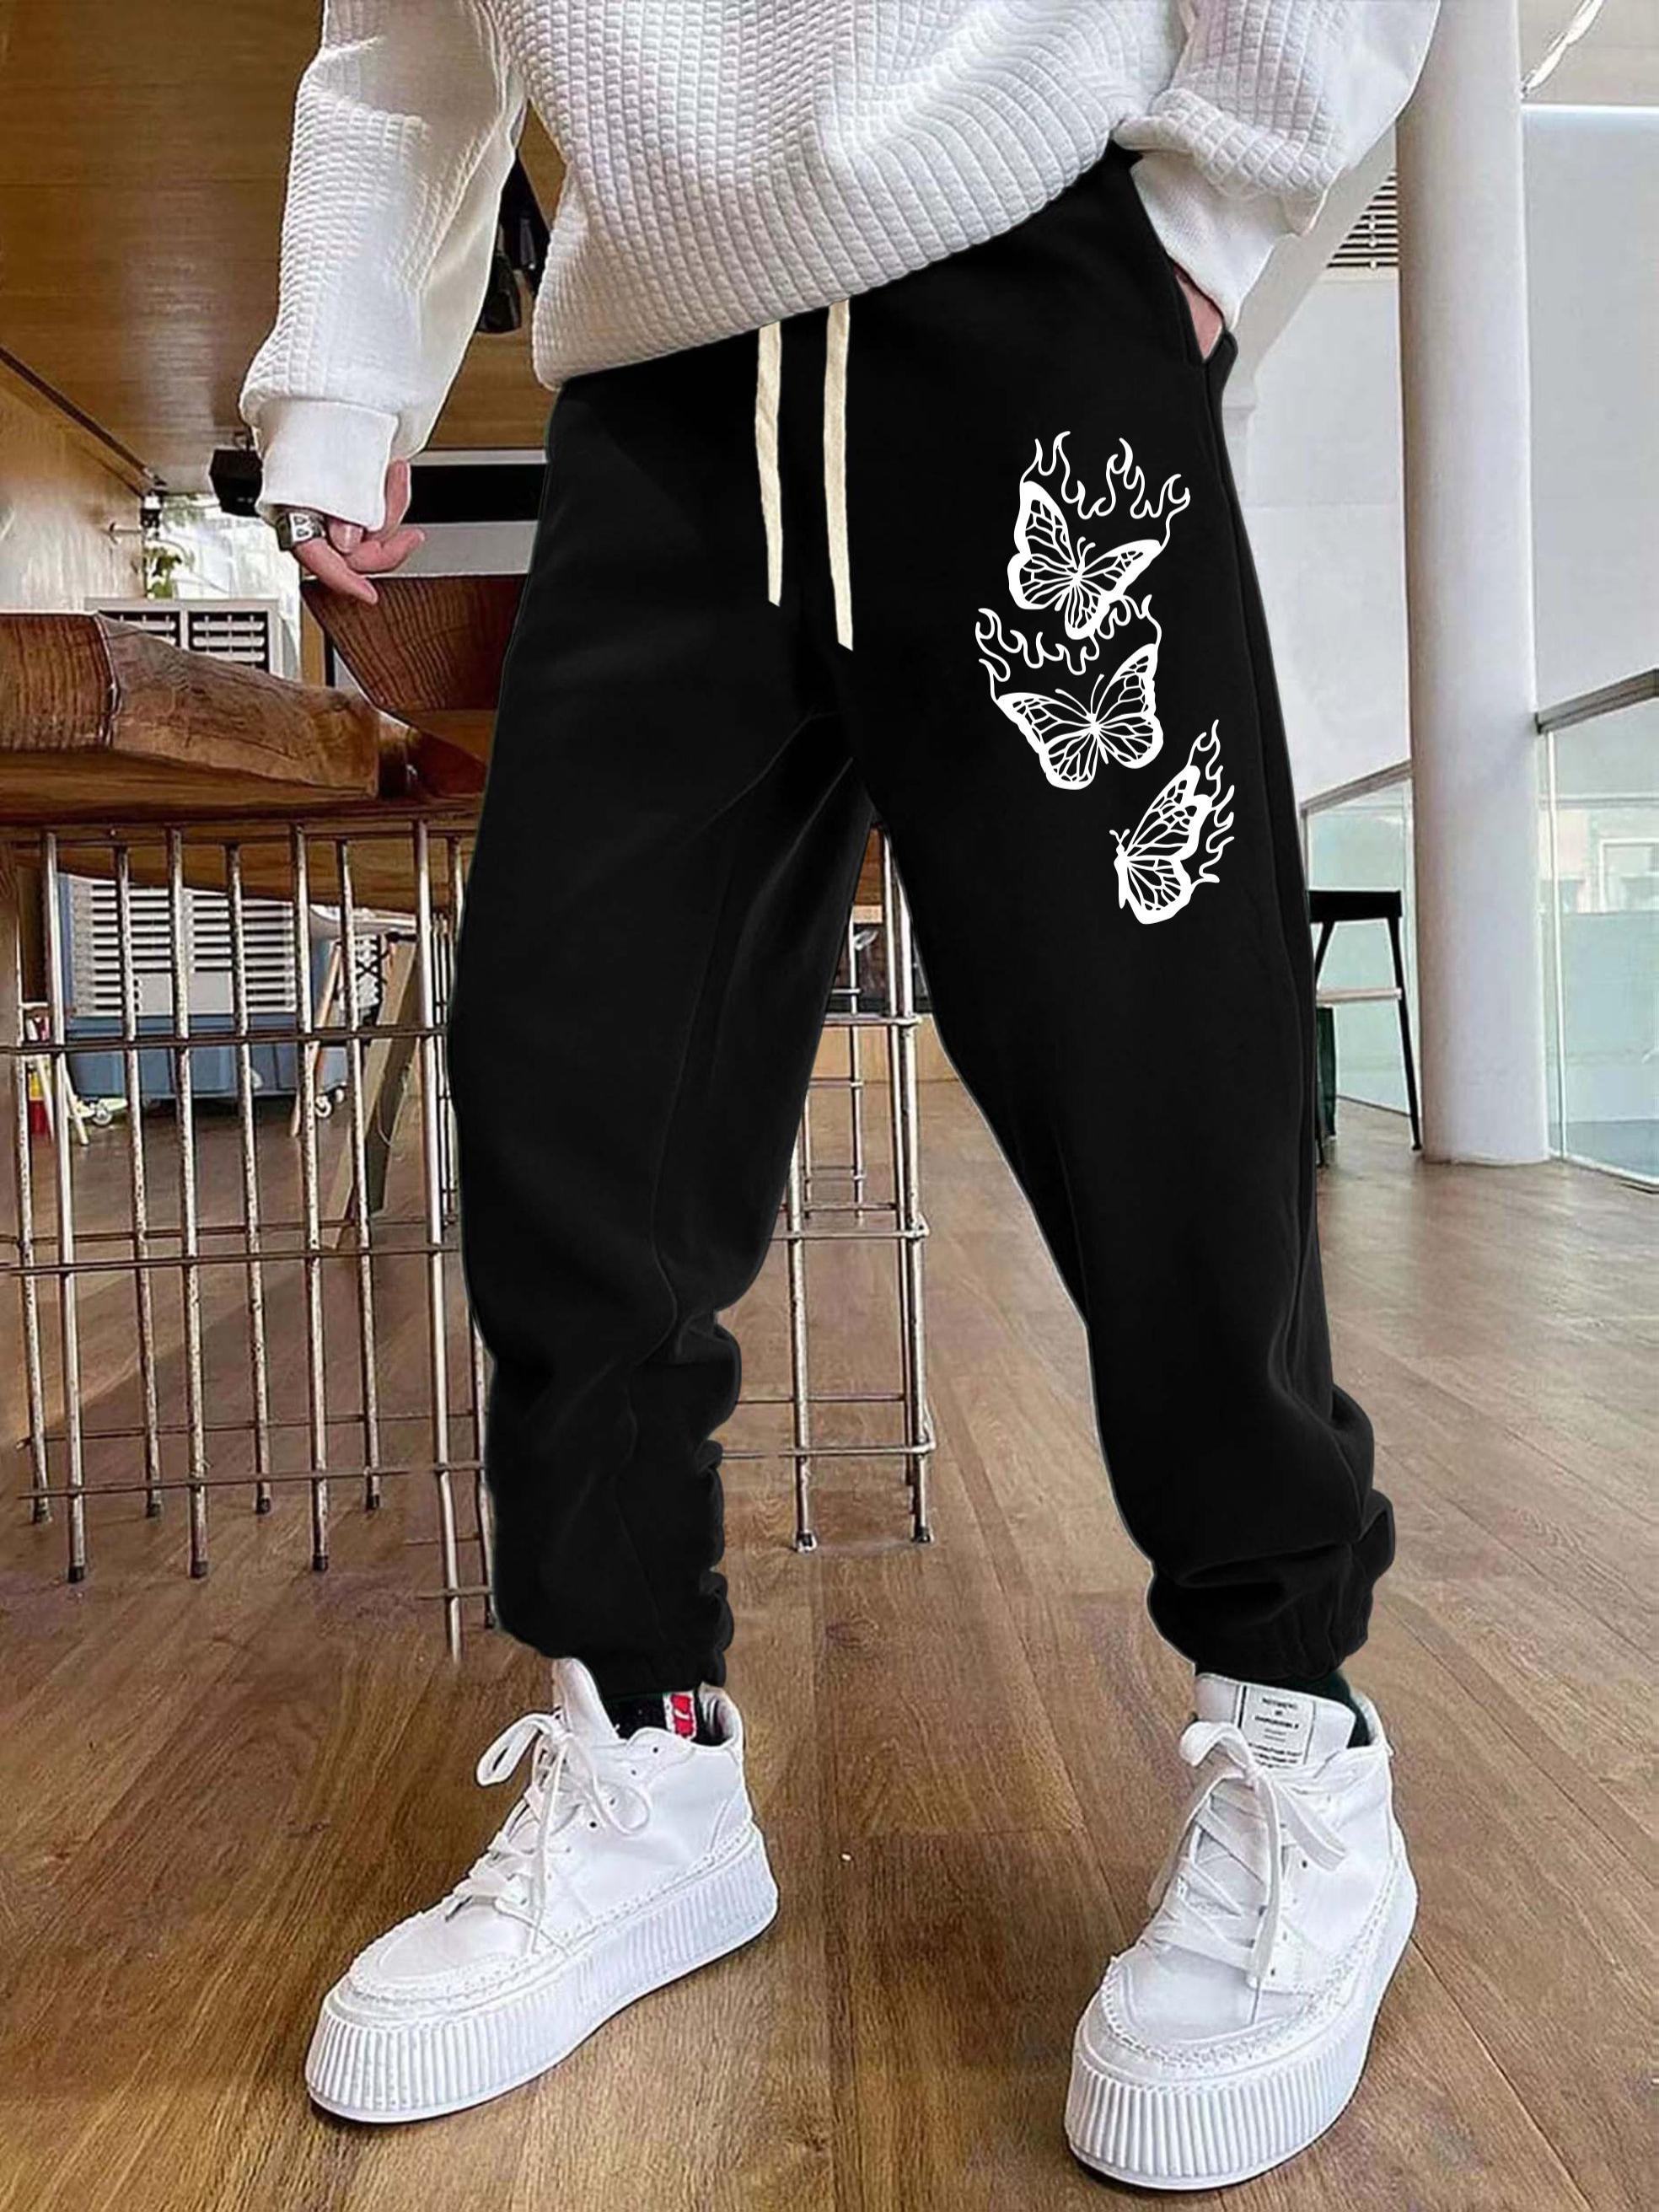 Free Shipping-BUTTERFLY JOGGER PANTS from NEW ARRIVAL  Stylish pants, Cute  sweatpants outfit, Aesthetic clothing stores